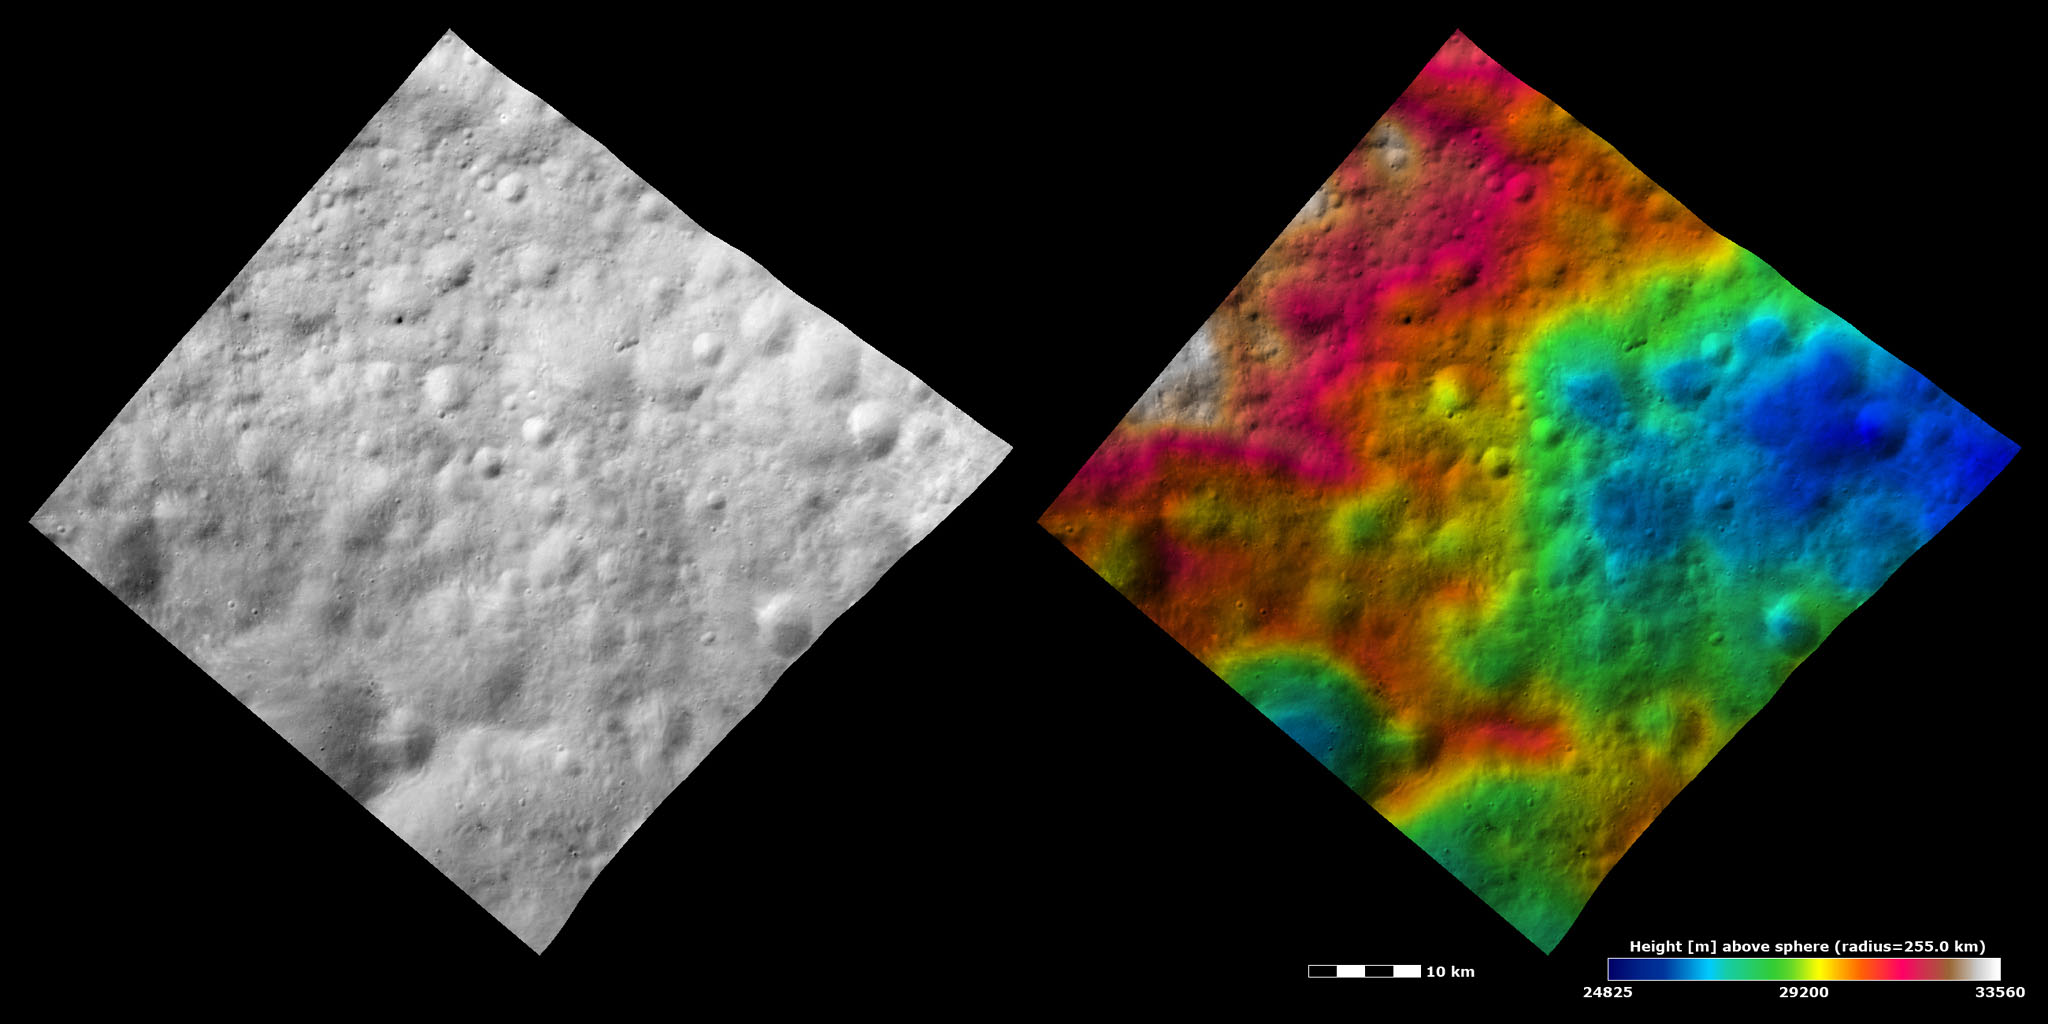 Topography and Albedo Image of Ancient Terrain with Ruined Crater